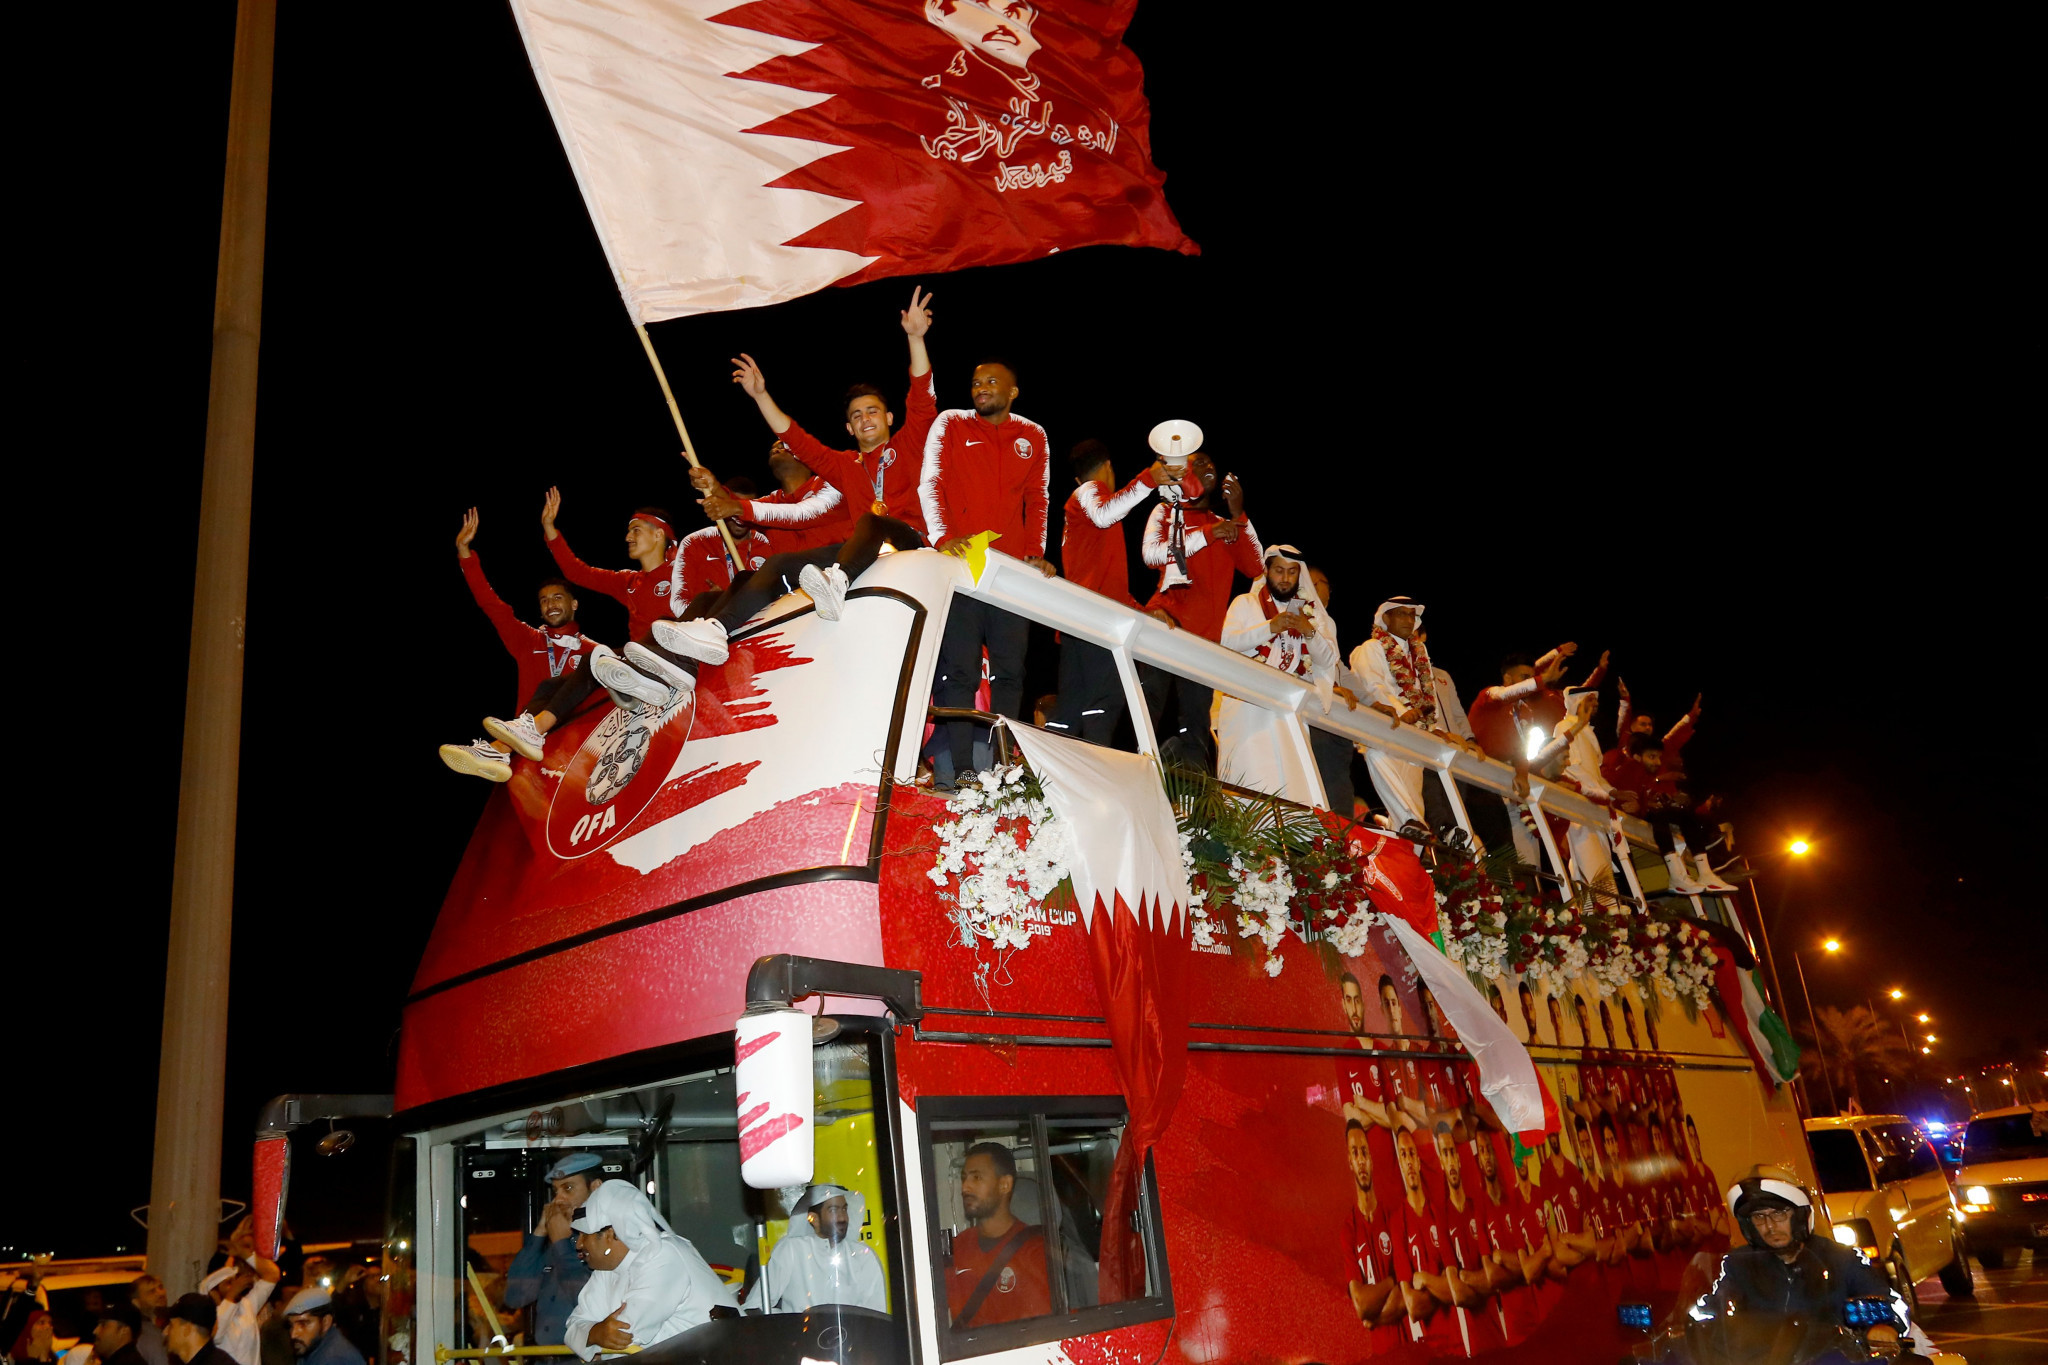 The Qatari football team celebrate their Asian Cup victory, illustrating how quickly fortunes can change ©Getty Images